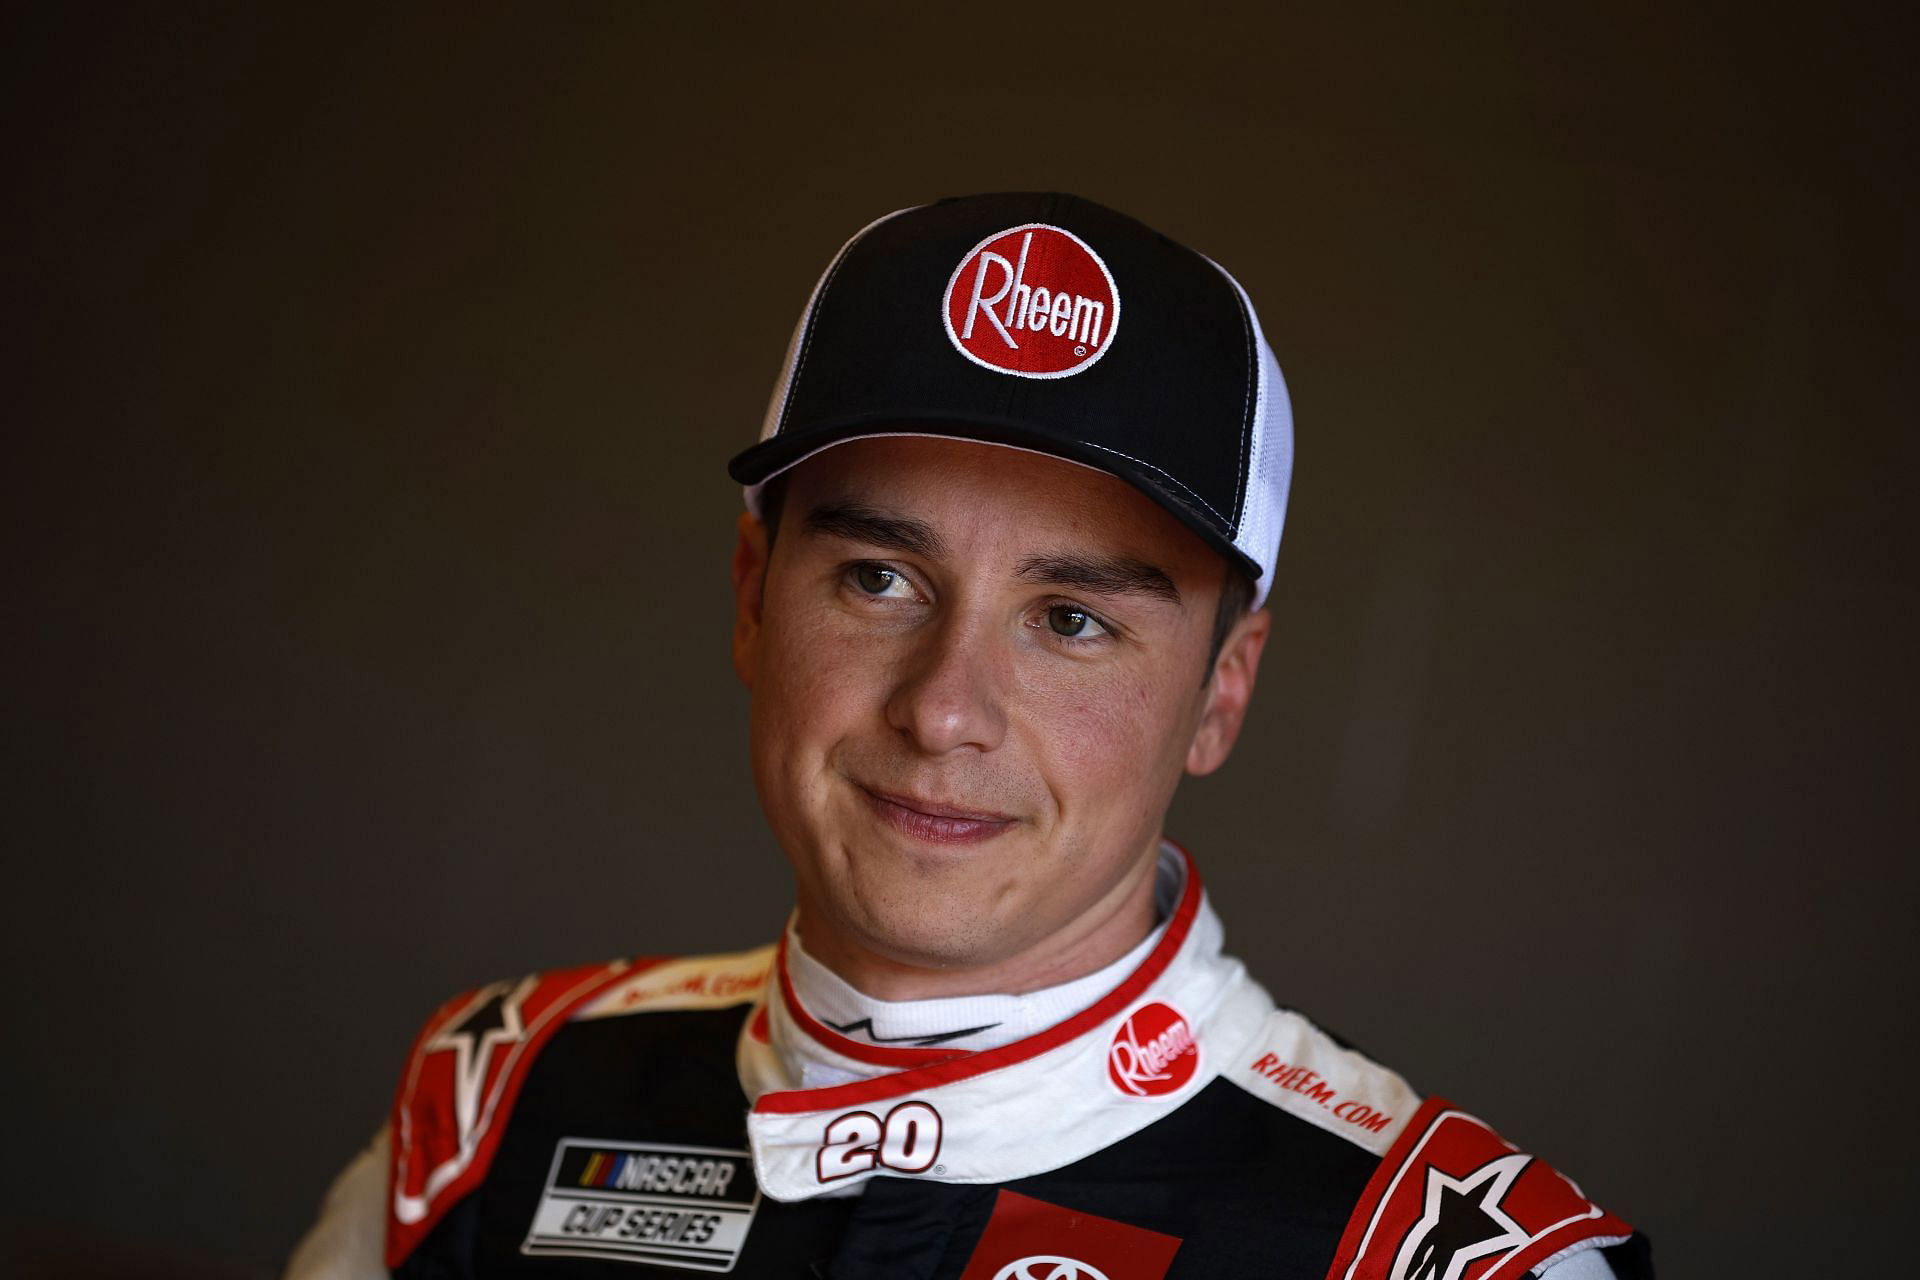 I desperately needed that": Christopher Bell thankful for his luck after  solid result at Iowa